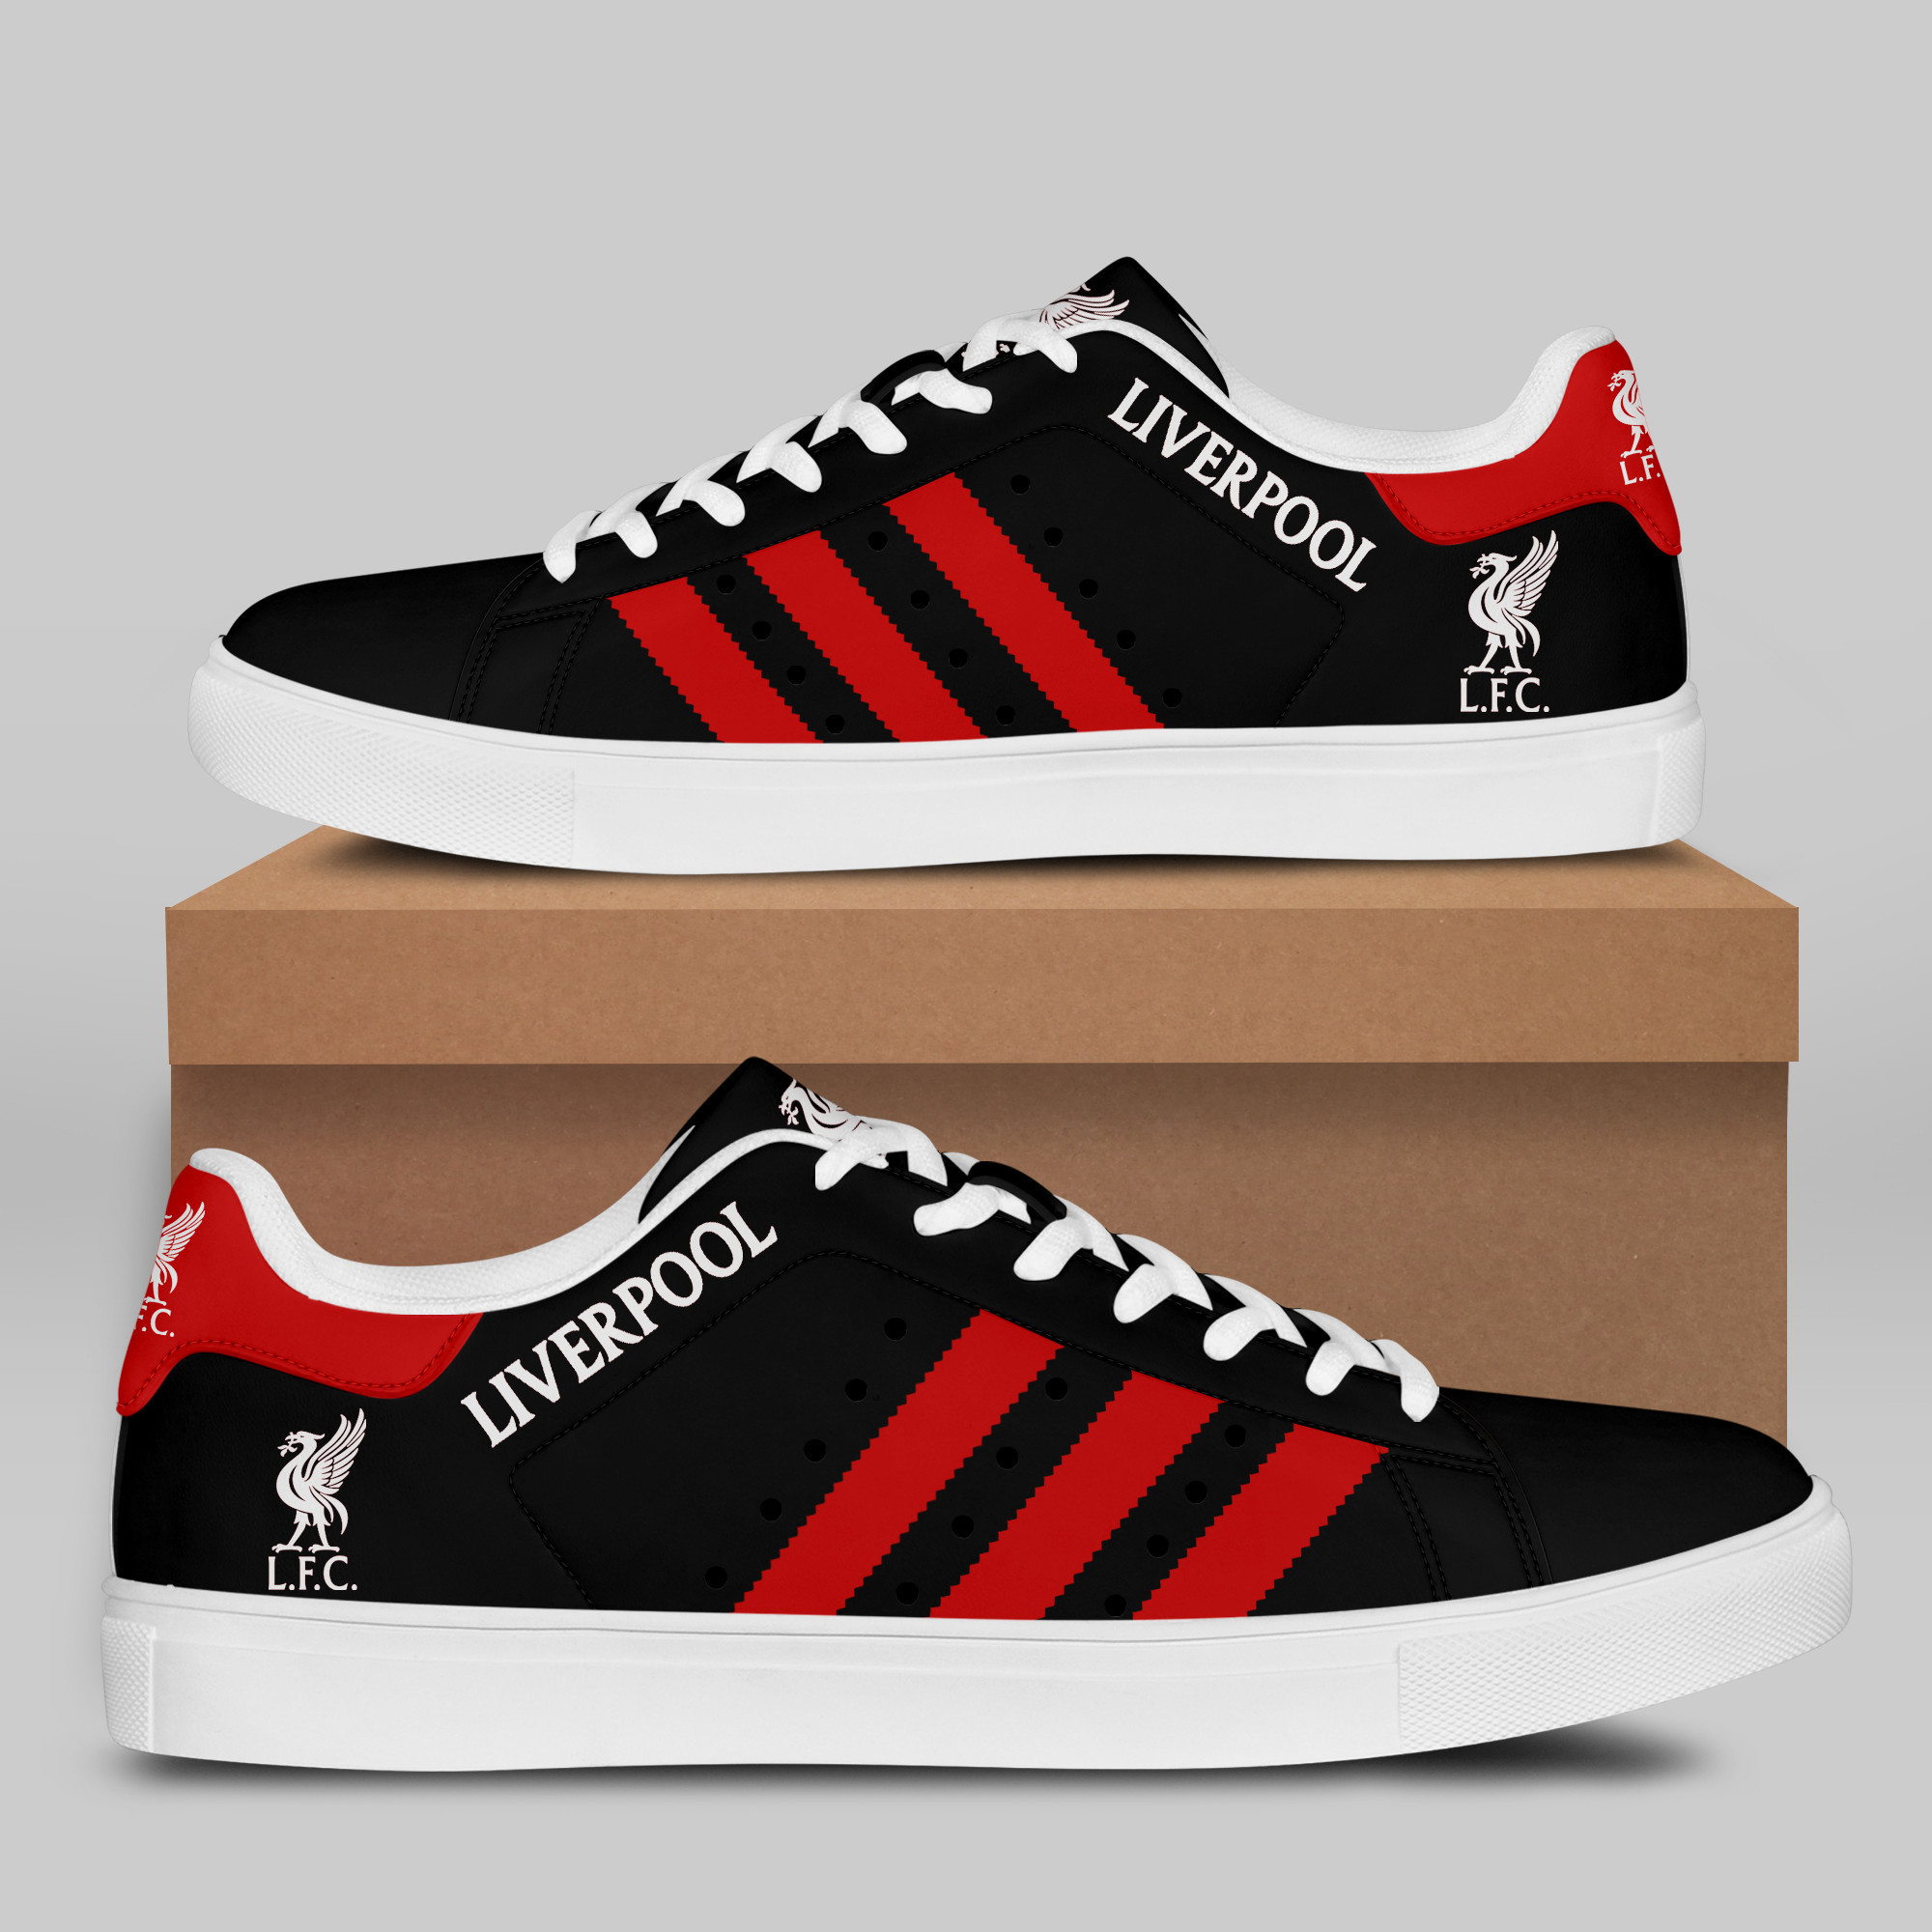 Liverpool FC Stn Smith Shoes Ver 2